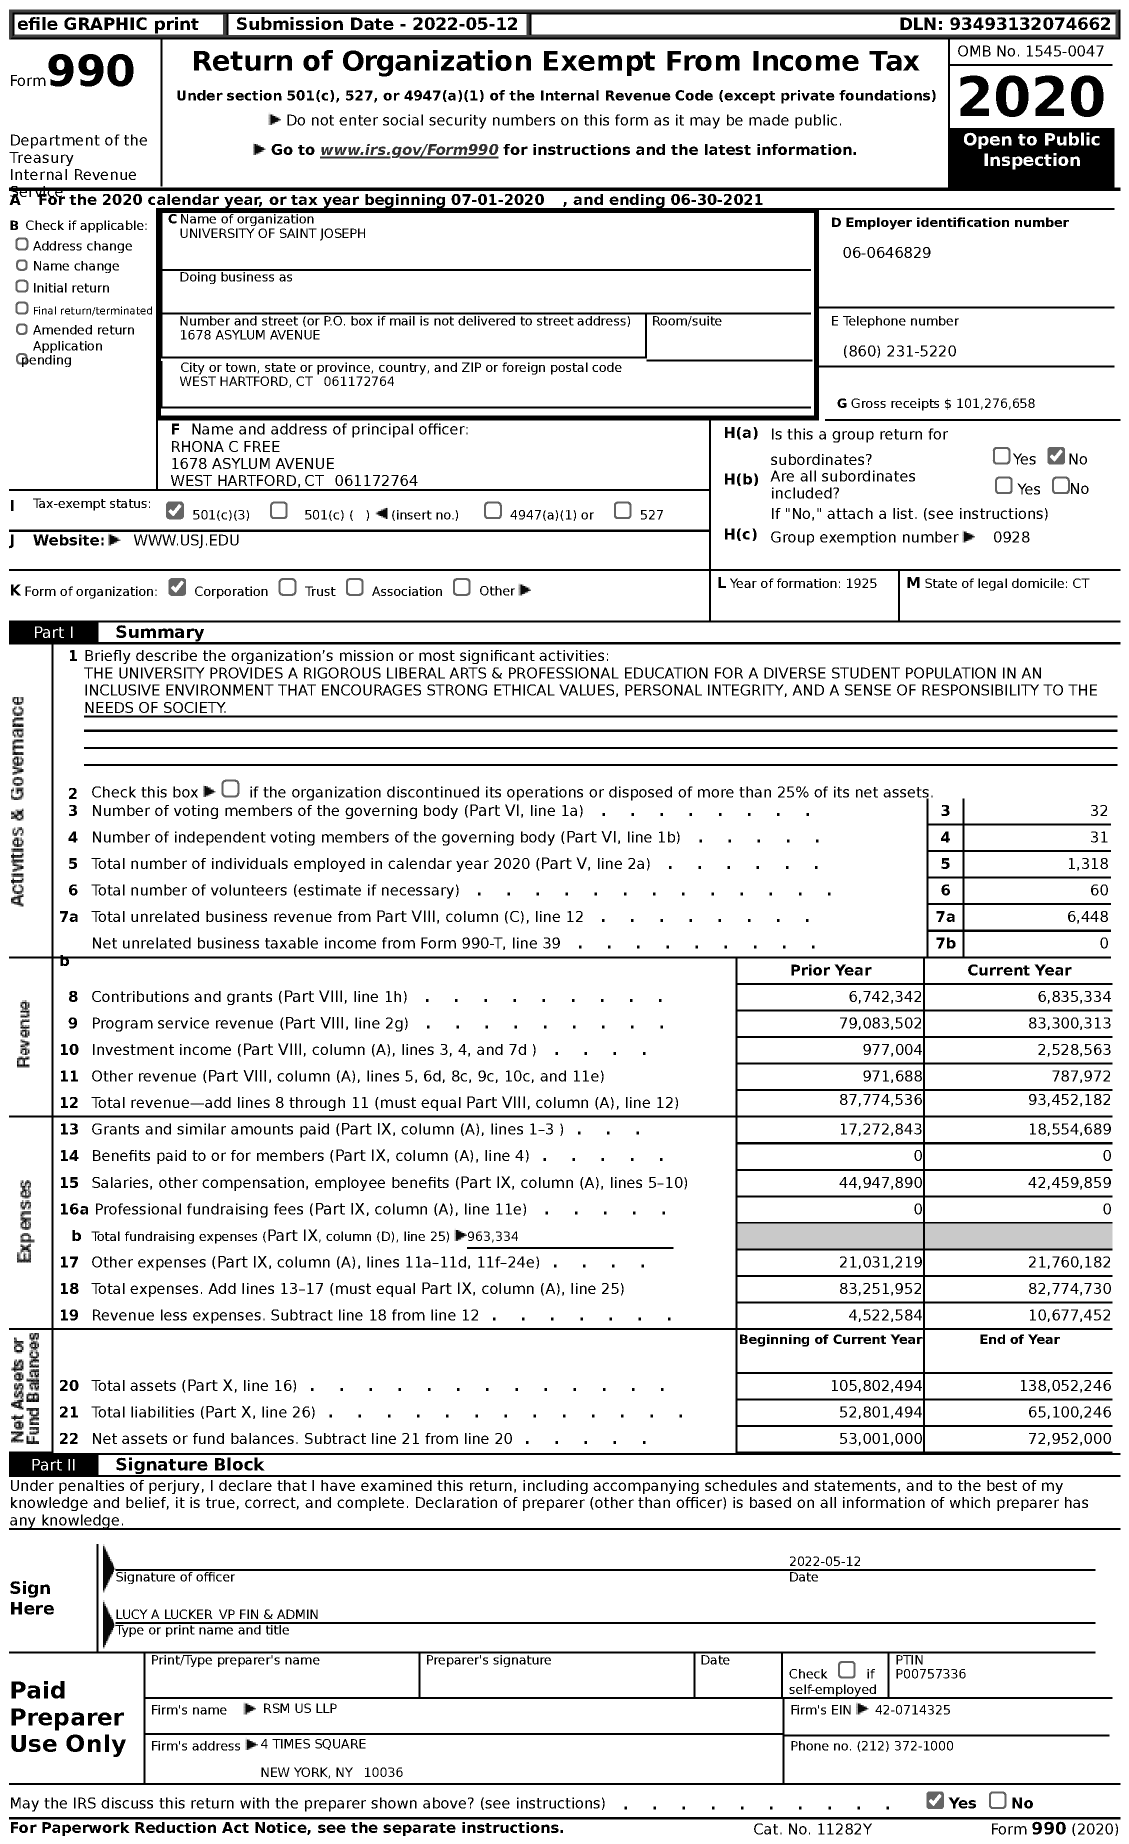 Image of first page of 2020 Form 990 for University of Saint Joseph (USJ)